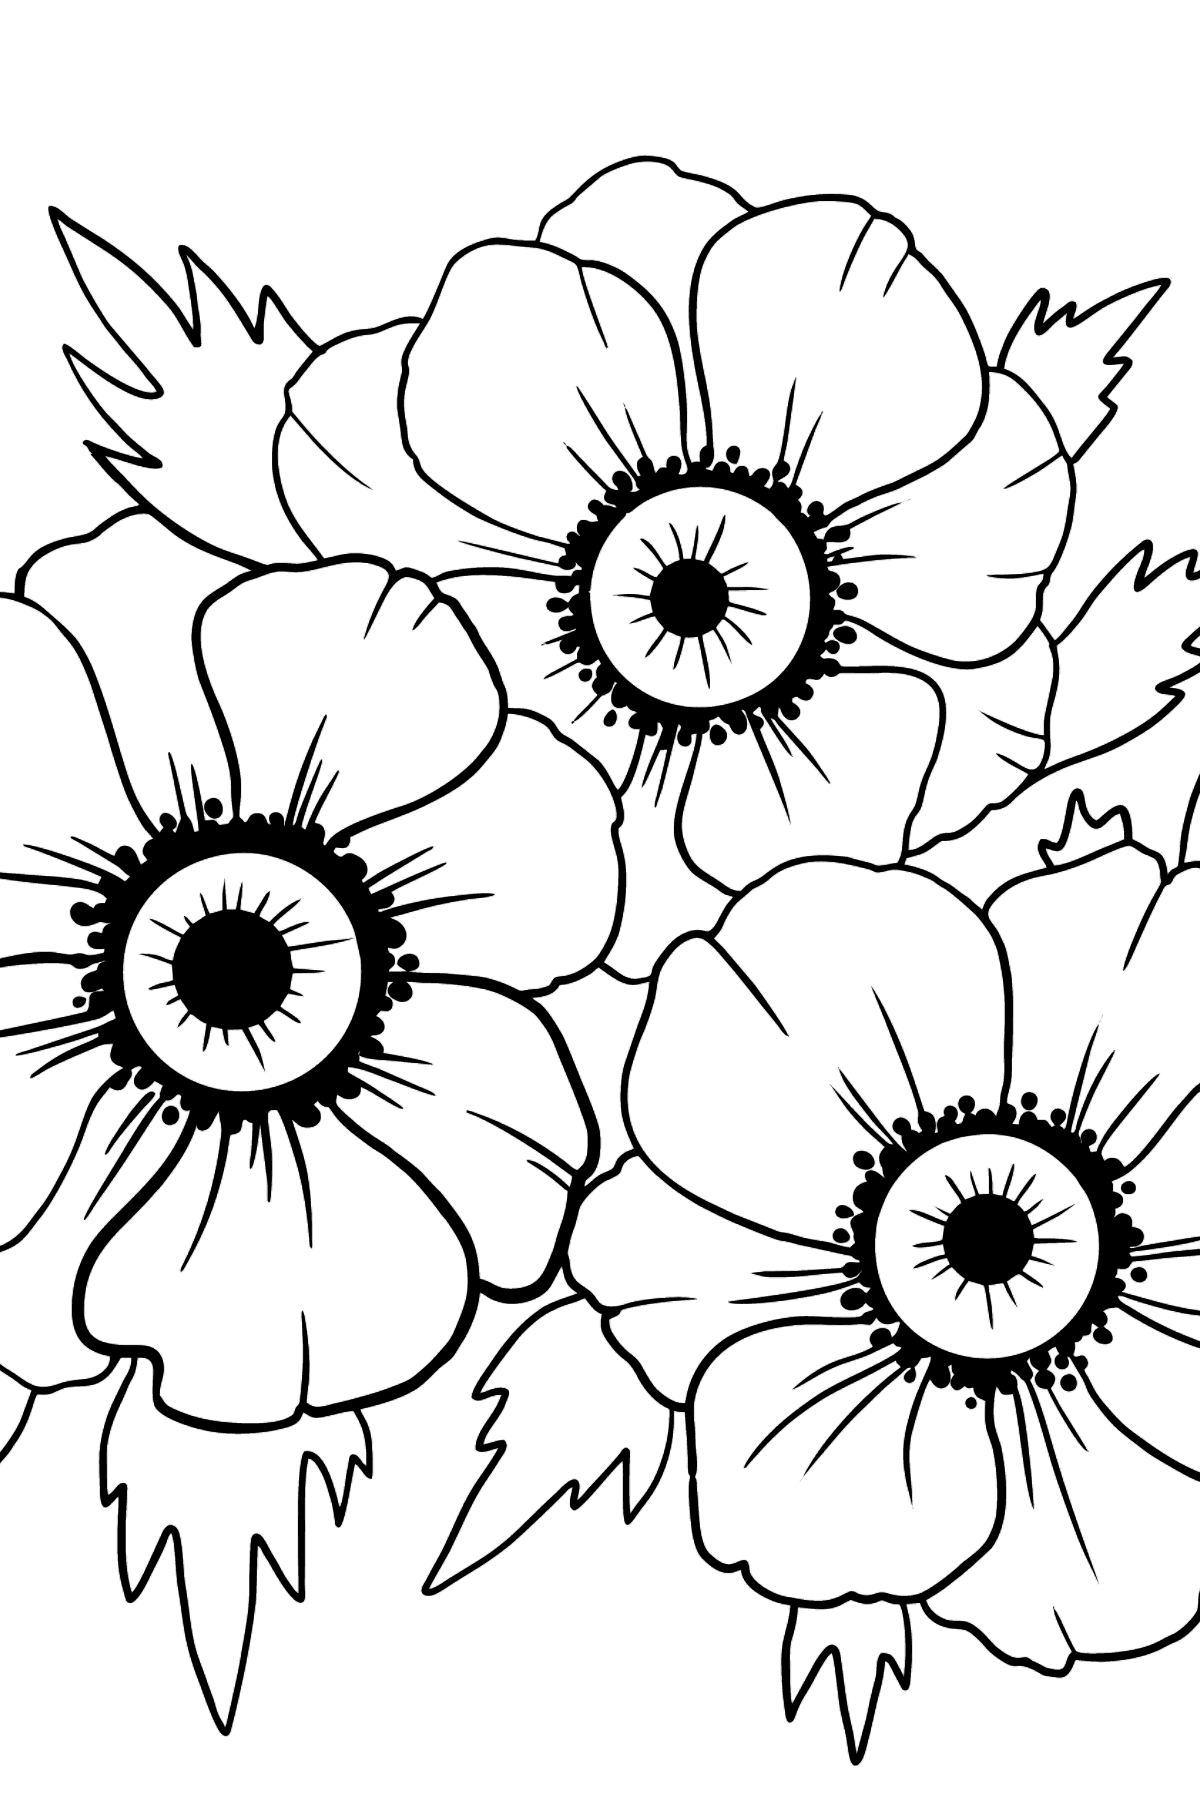 Coloring Page Anemone Mr. Fokker - Coloring Pages for Kids